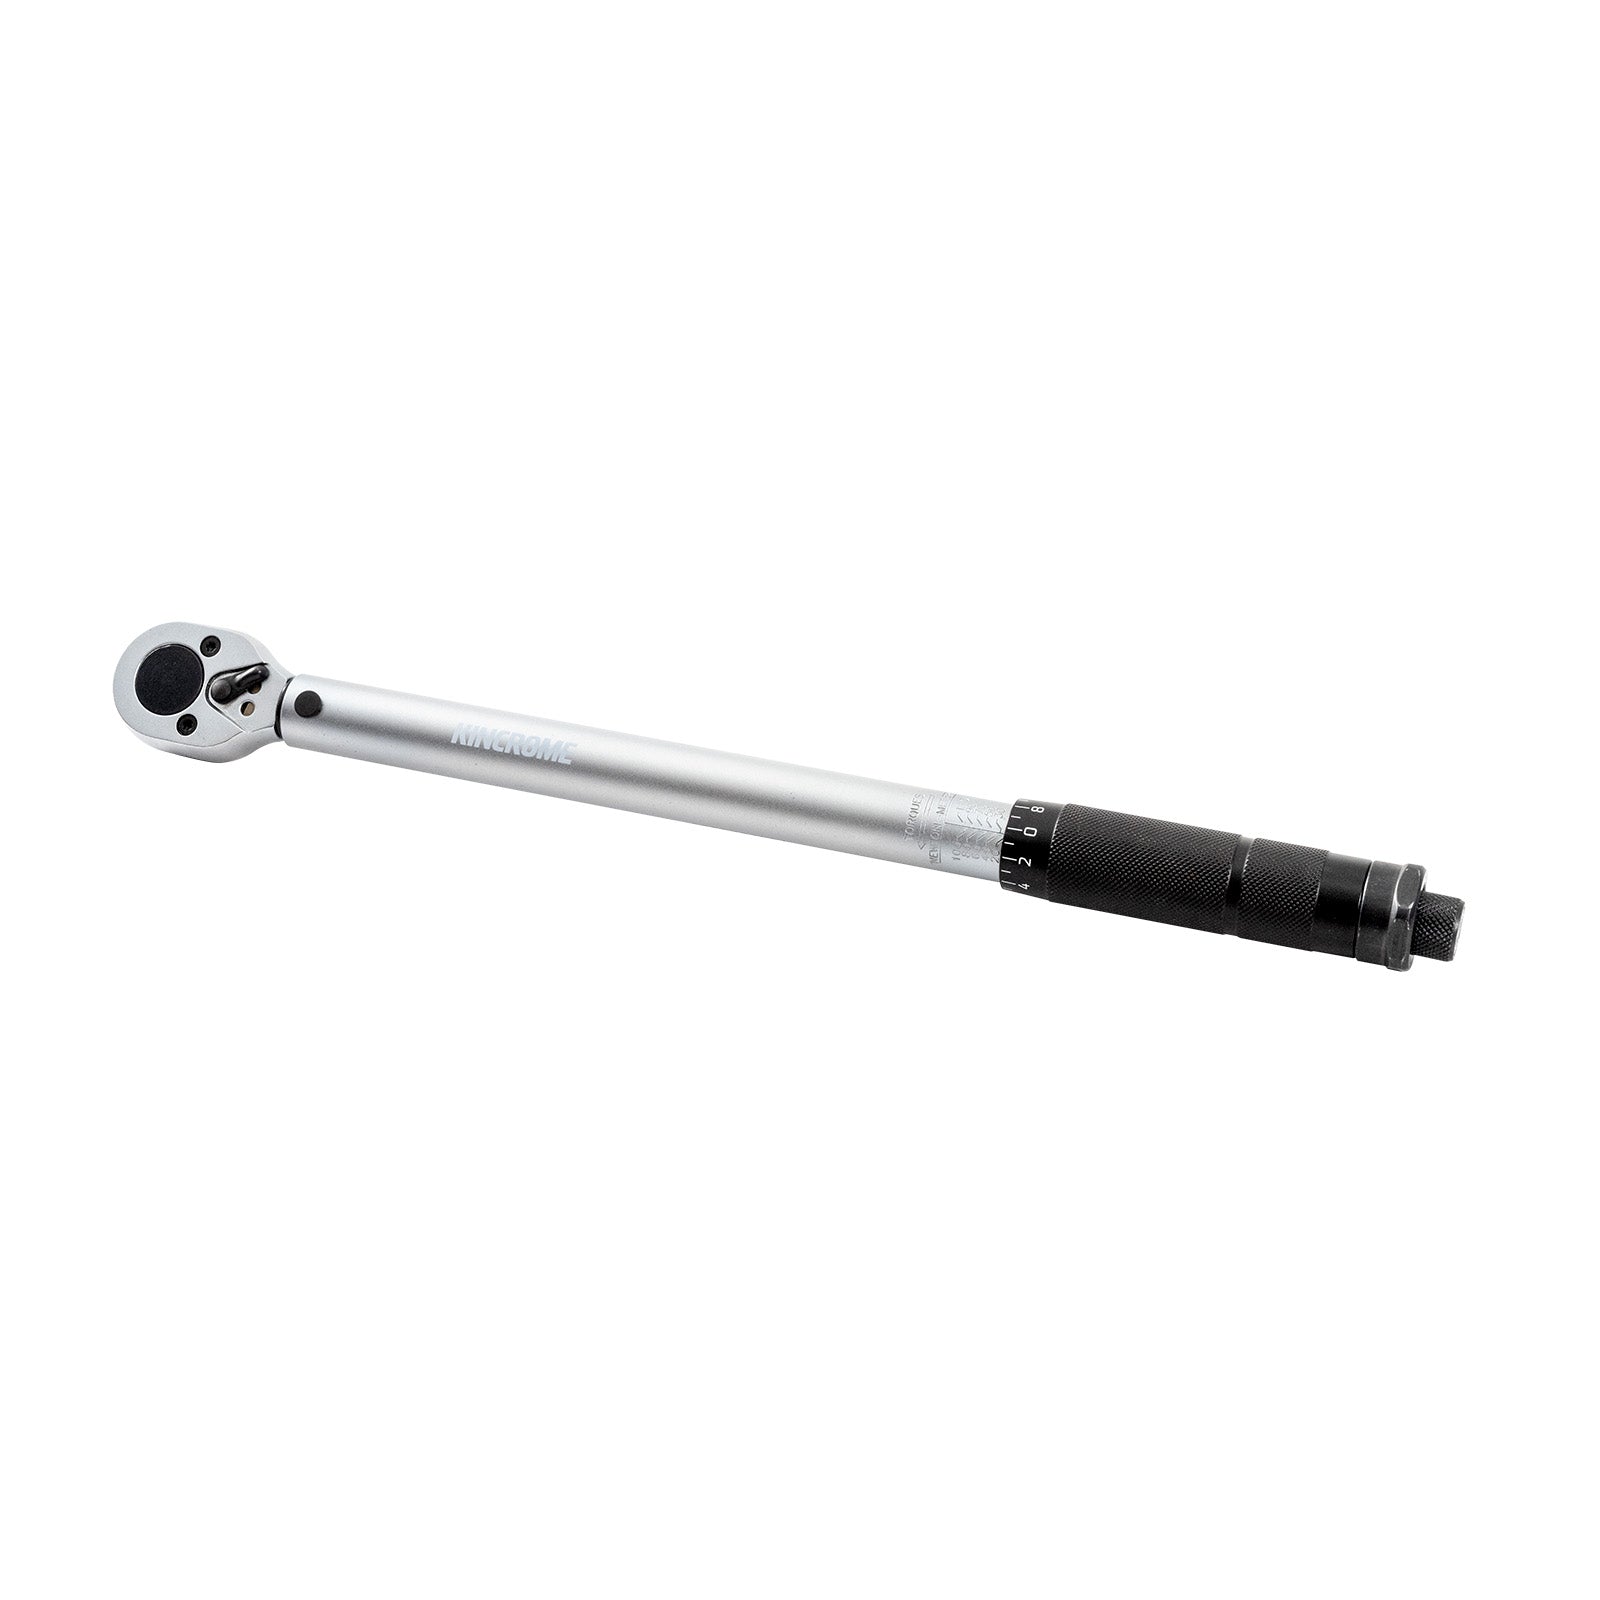 3/8" Drive Micrometer Torque Wrench MTW80F by Kincrome